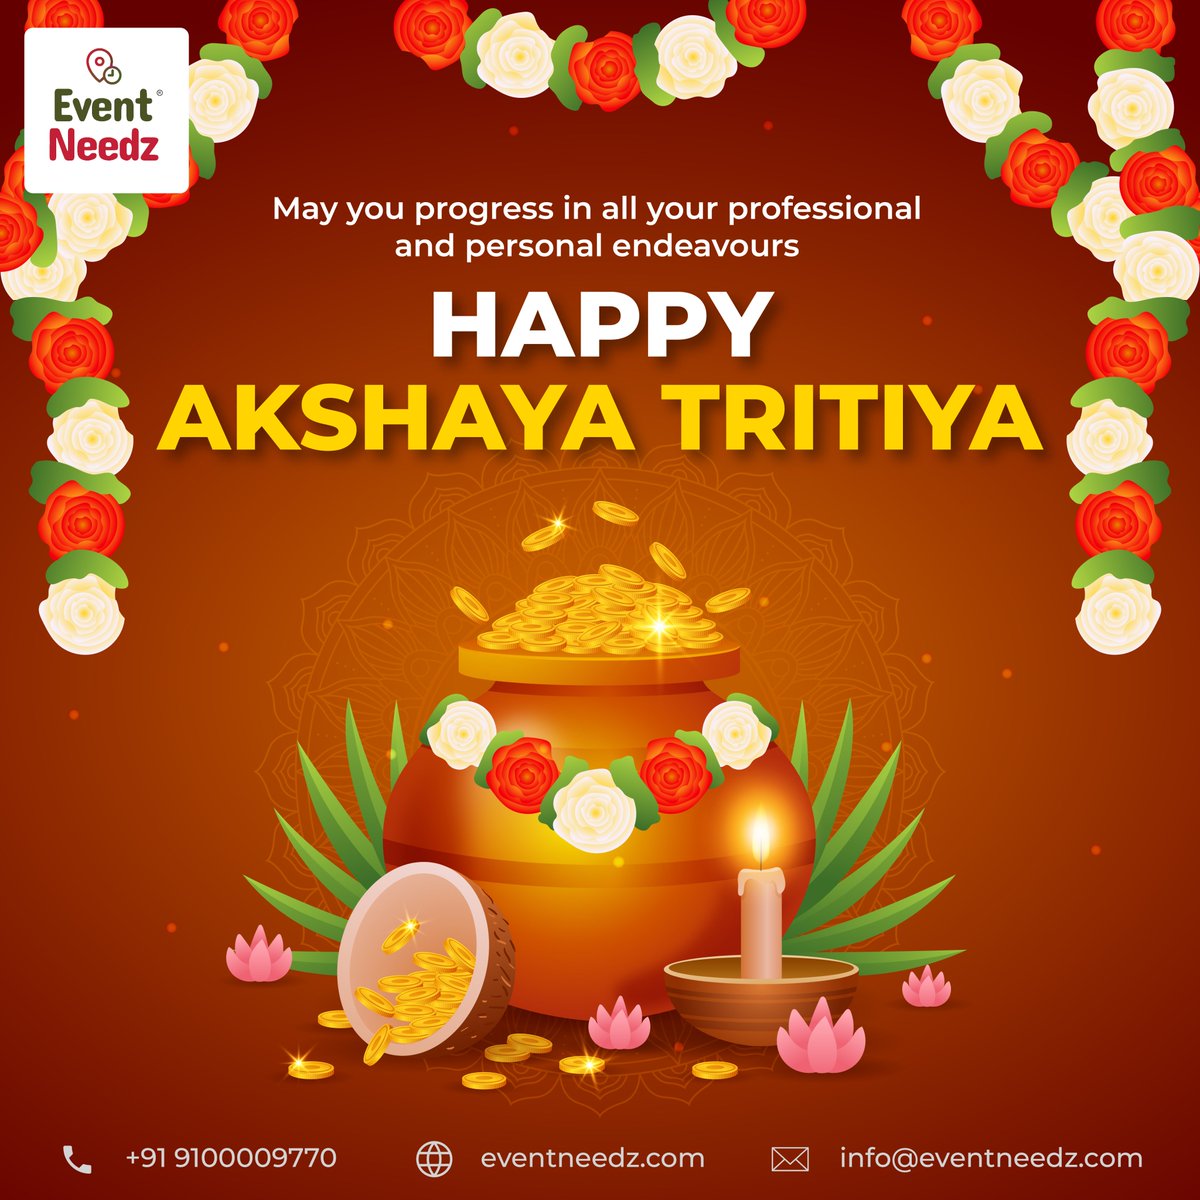 Embrace the auspicious vibes of Akshaya Tritiya! May this day bring endless blessings and prosperity into your life. 

📷eventneedz.com
📷+91 9100009770

#AkshayaTritiya #Blessings #Prosperity #eventplanner #eventdecor #eventneedz #Events #theEZway #eventplanning